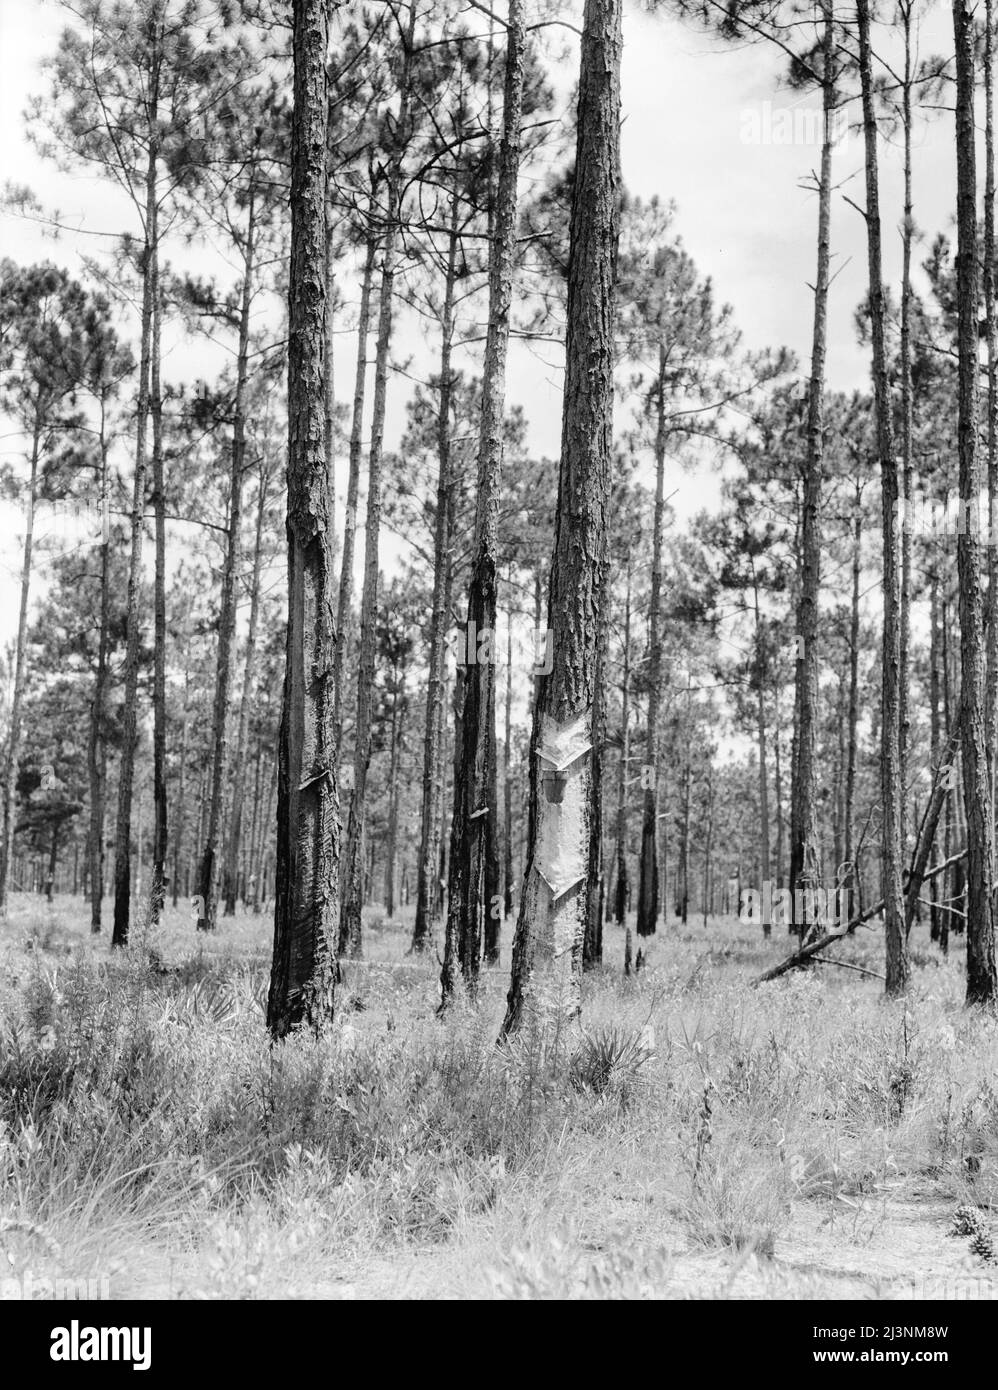 Turpentine trees in northern Florida. Stock Photo